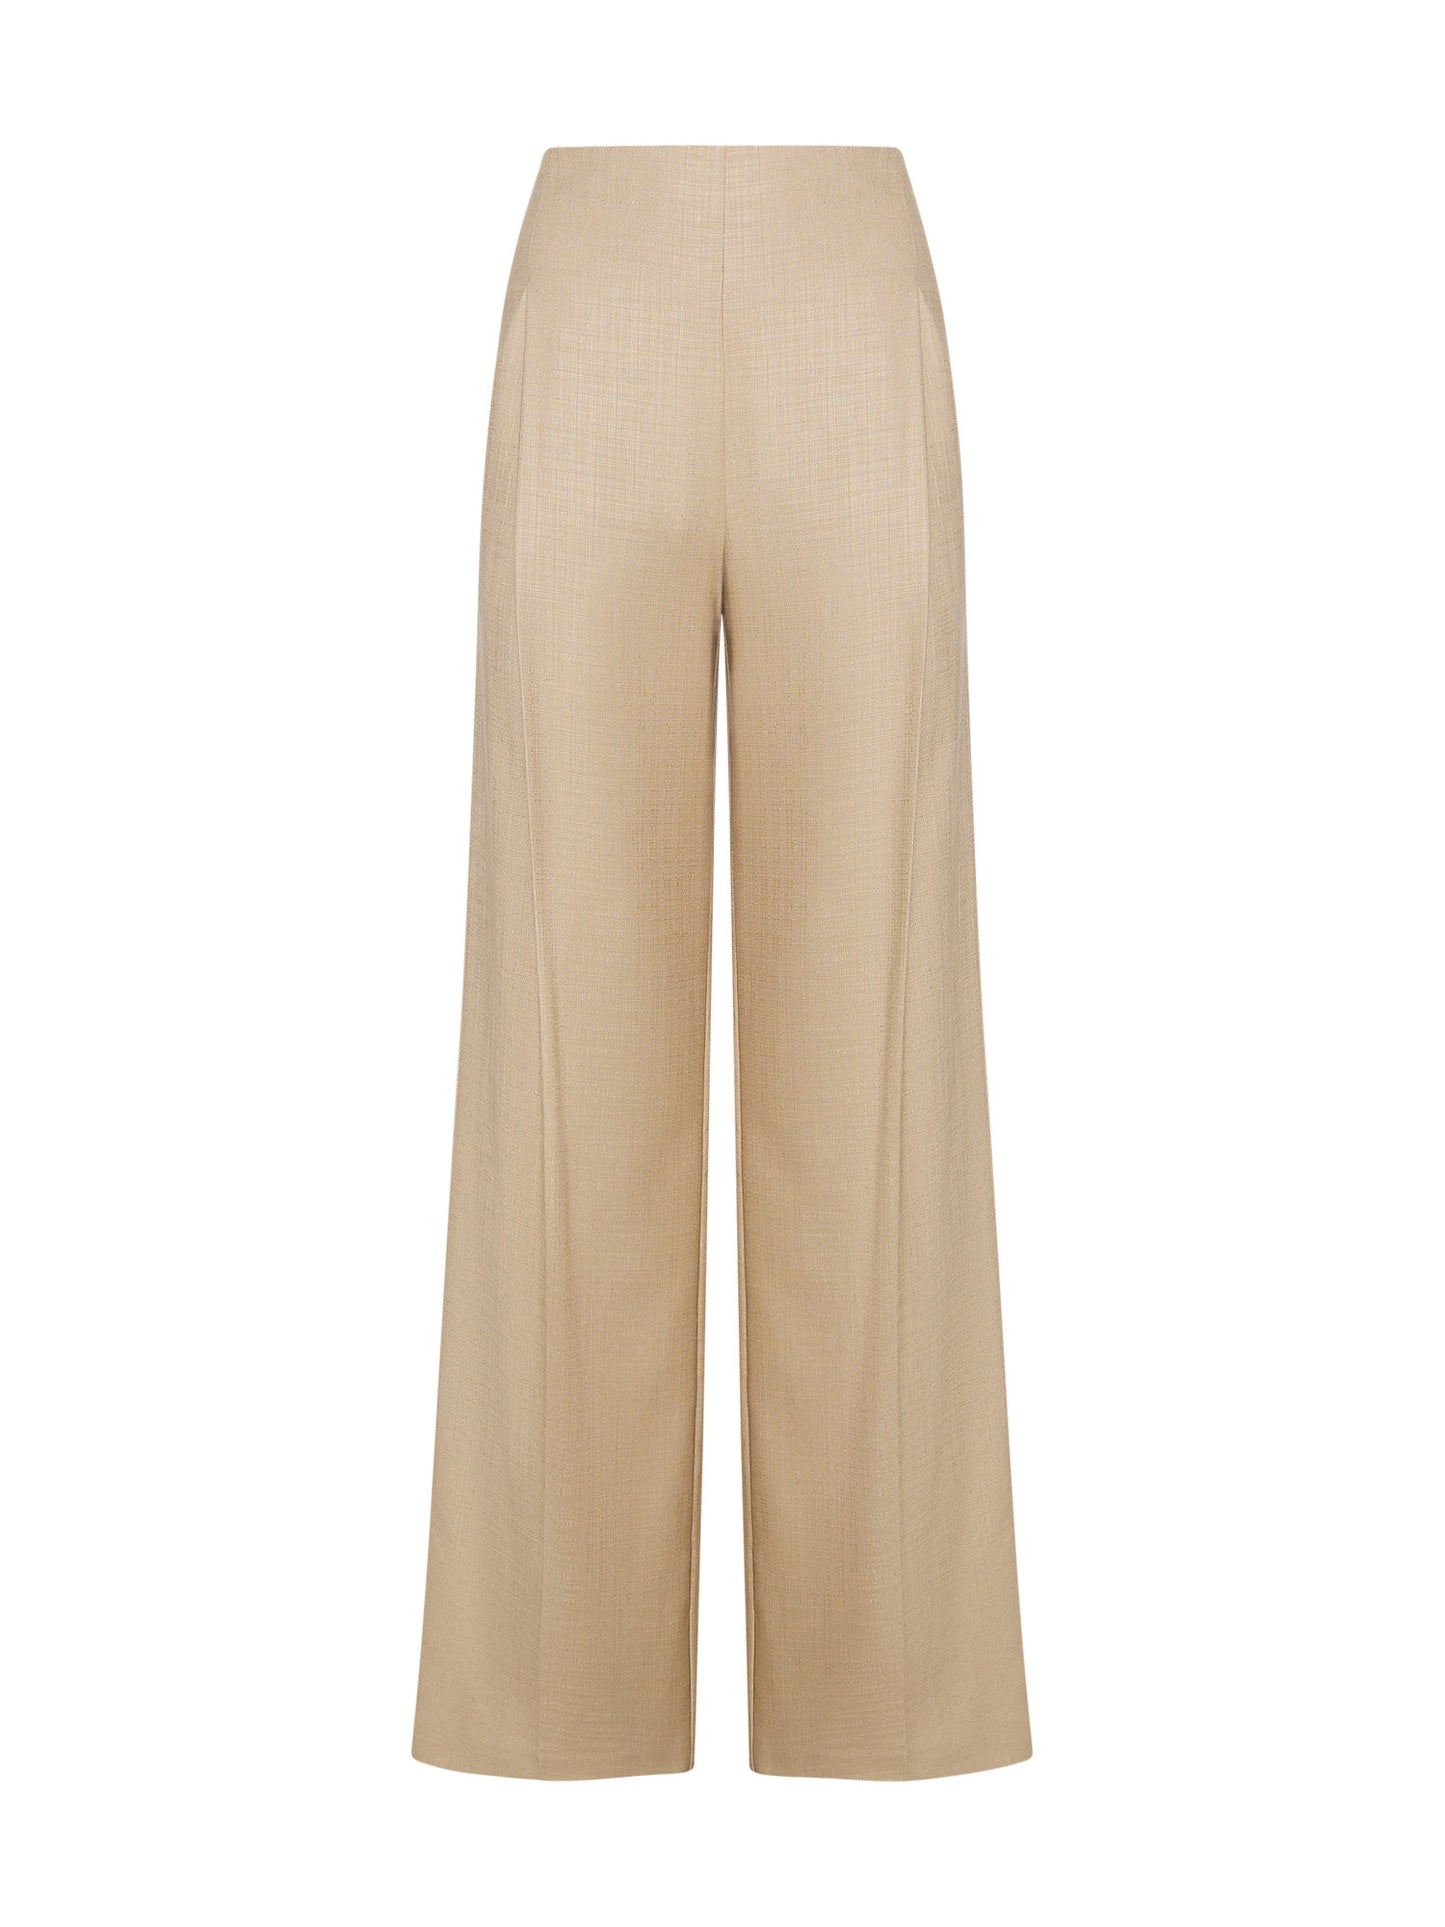 Wide trousers with slanted pockets in luxury textured fabric